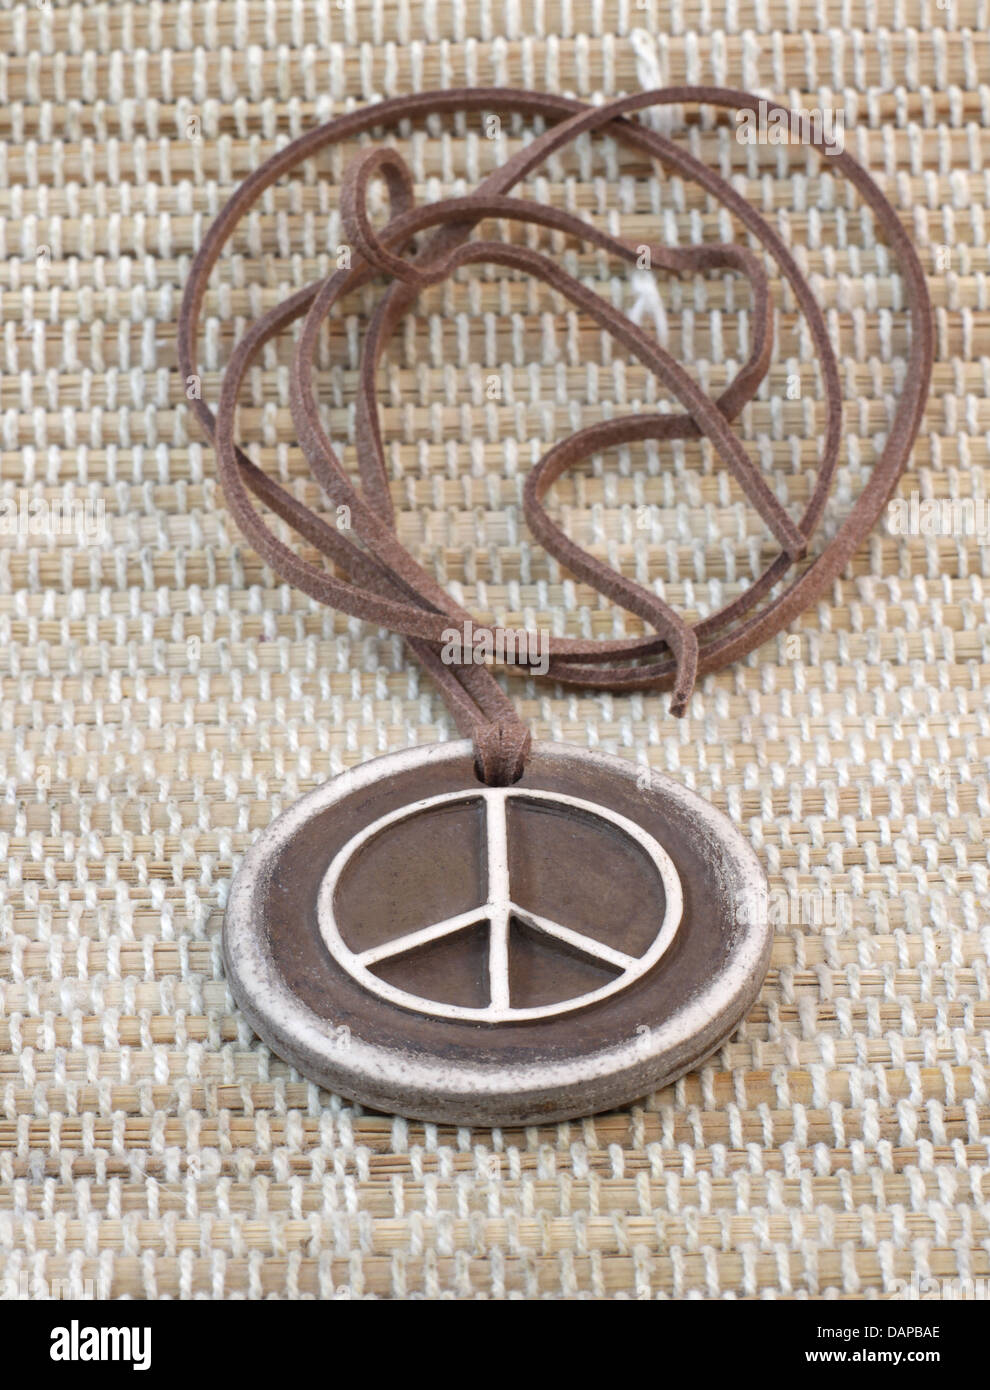 clay pendant pacifist handmade the symbol of peace Stock Photo